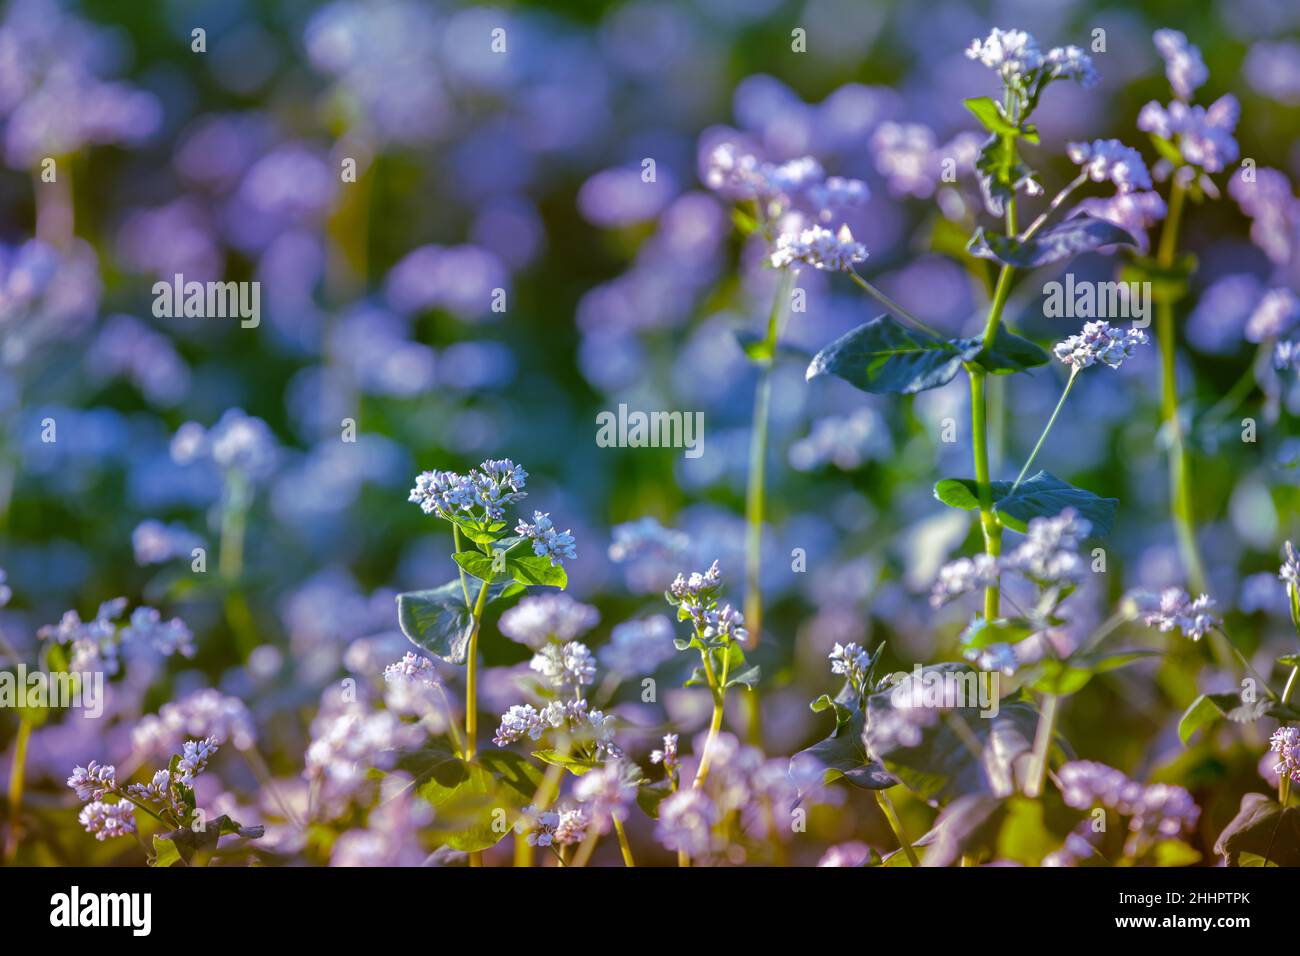 Blooming buckwheat field. Natural floral background Stock Photo